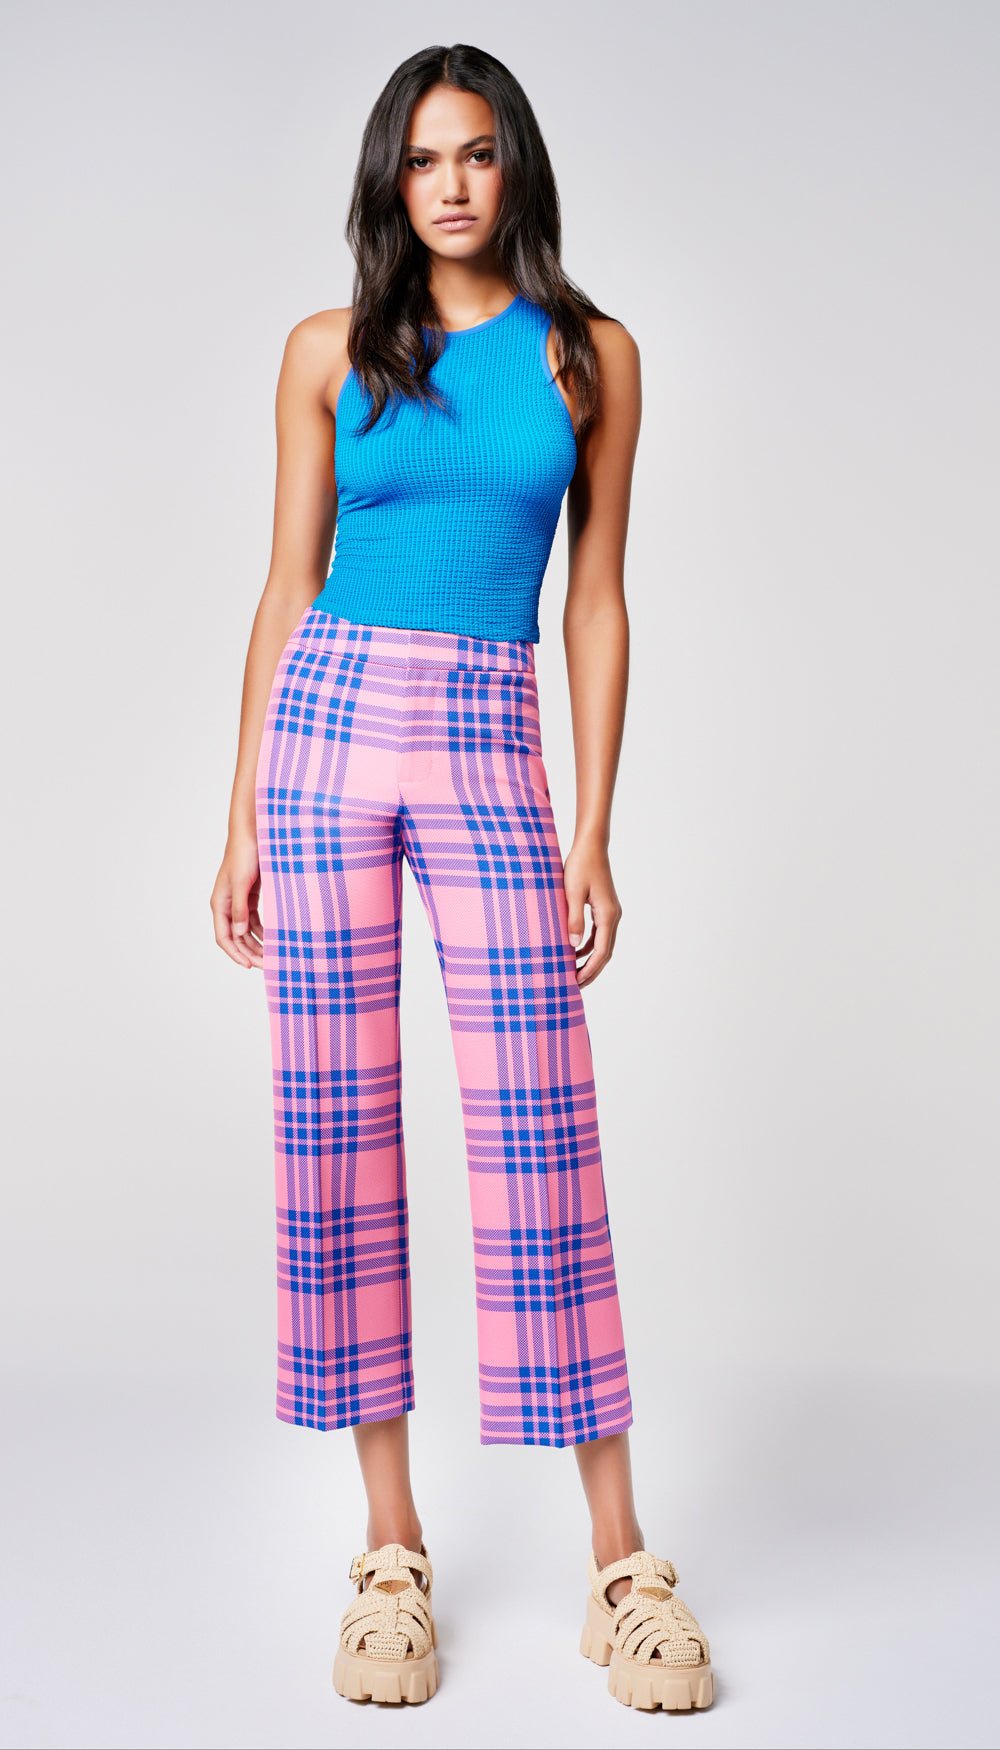 A woman in a pink and blue plaid pant and solid blue tank.